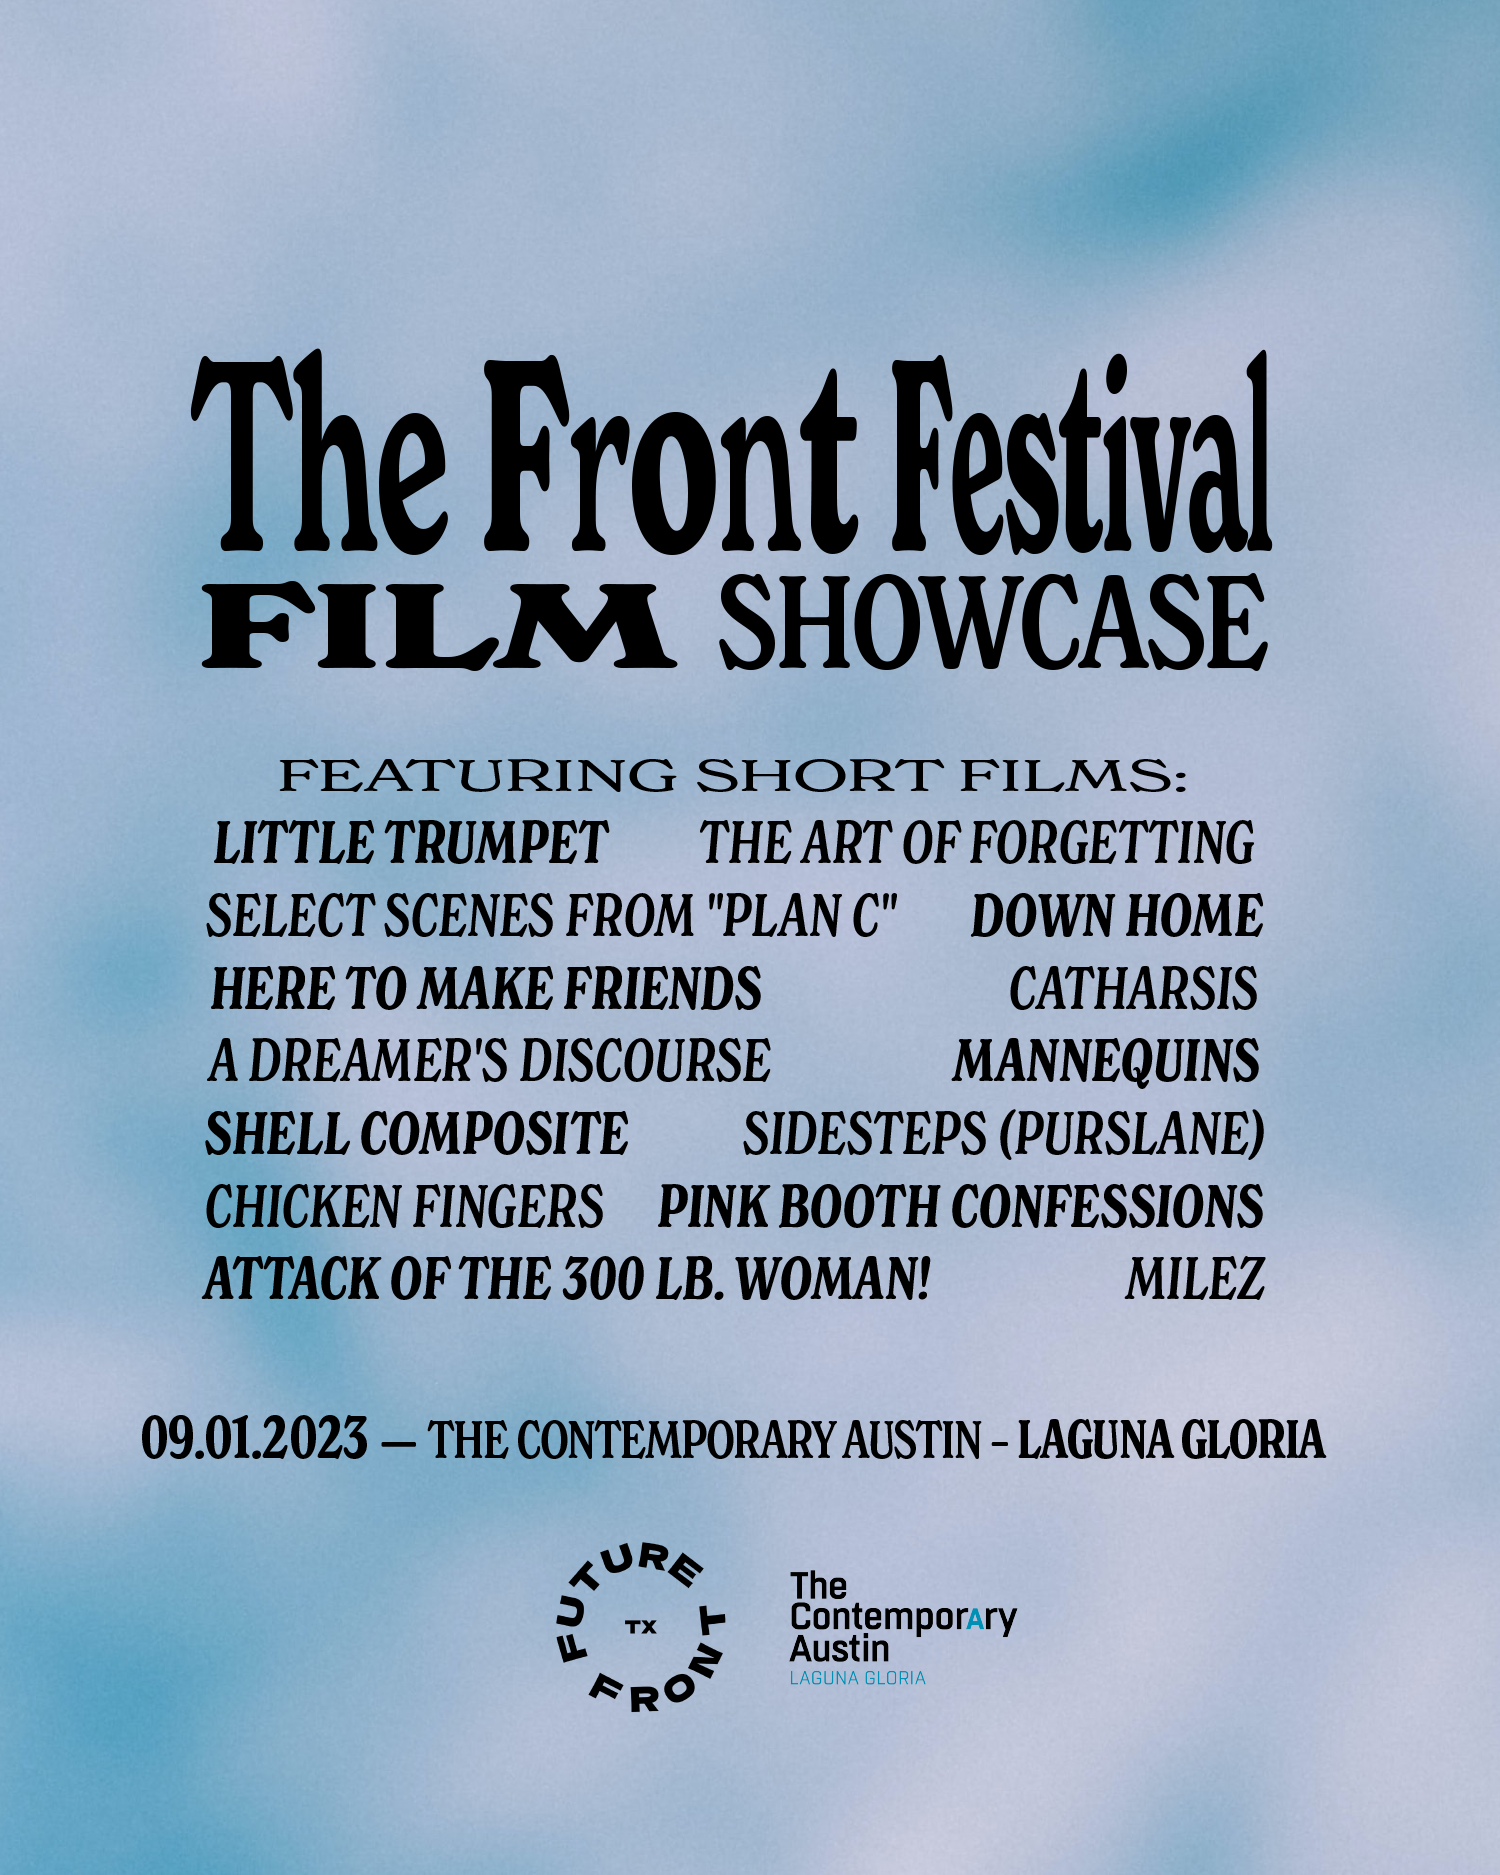 thefrontfestival_showcases-4.png